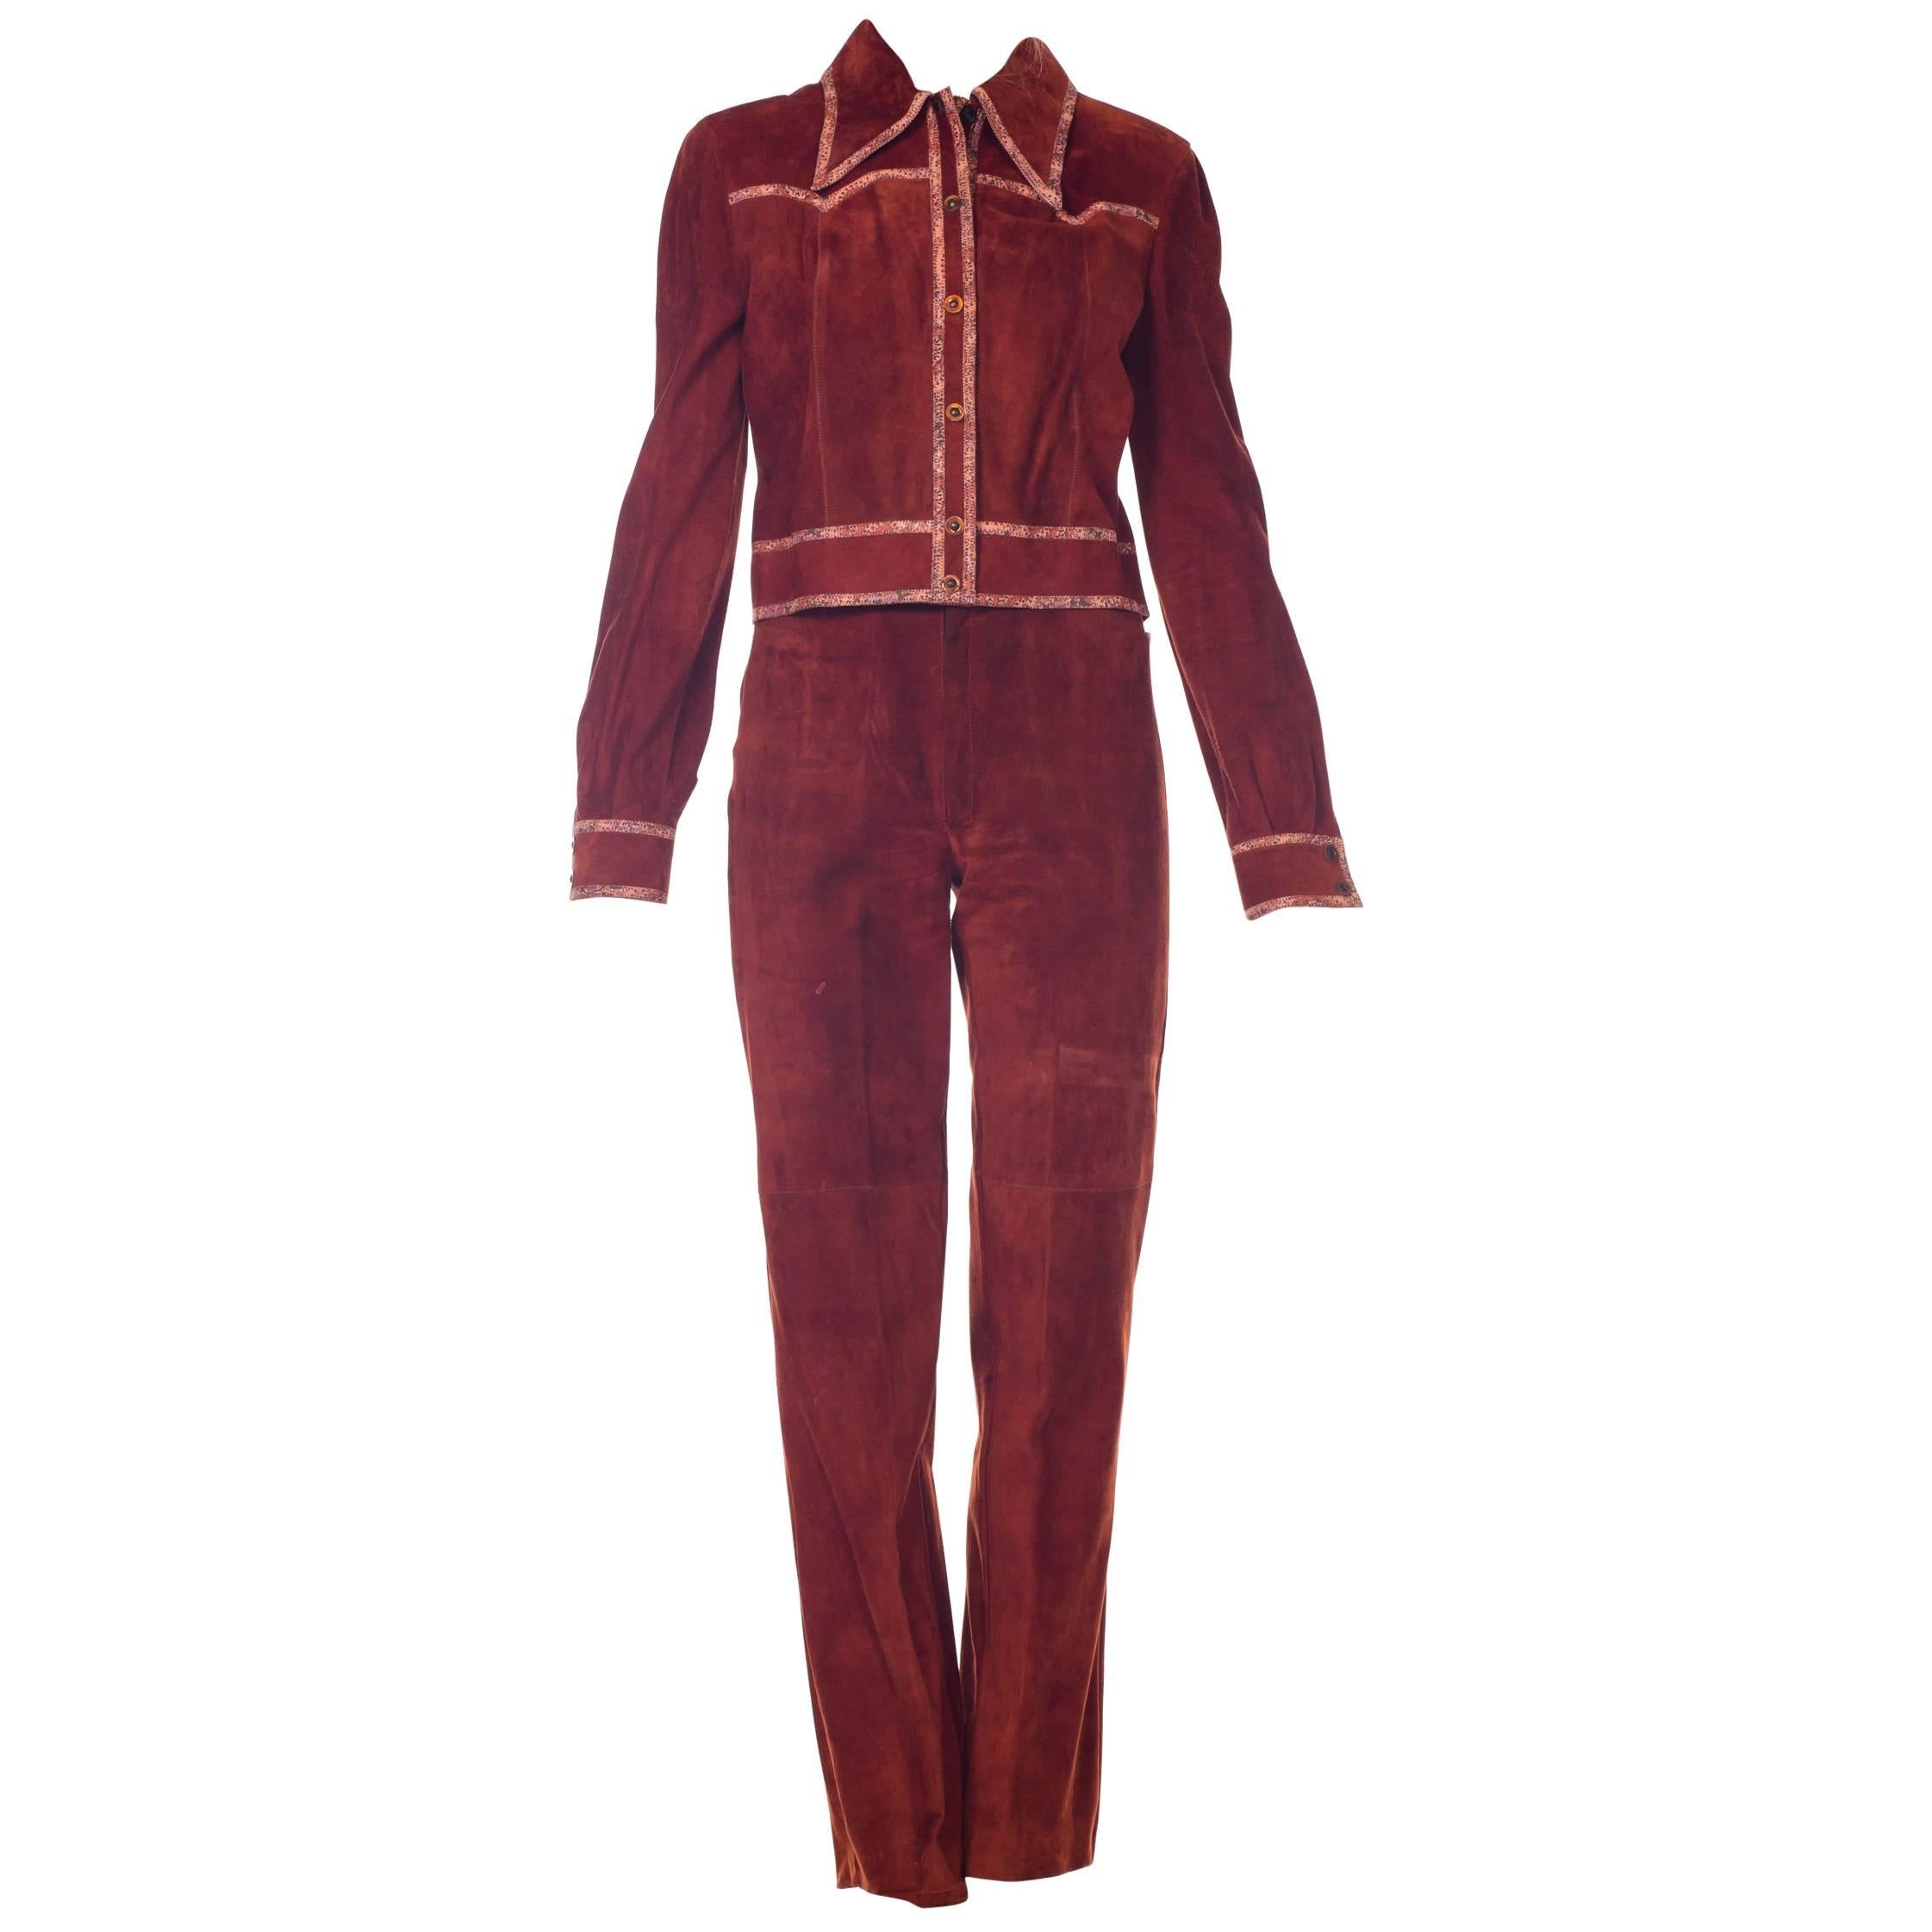 Roberto Cavalli Cognac Suede Pants and Jacket set with printed trims